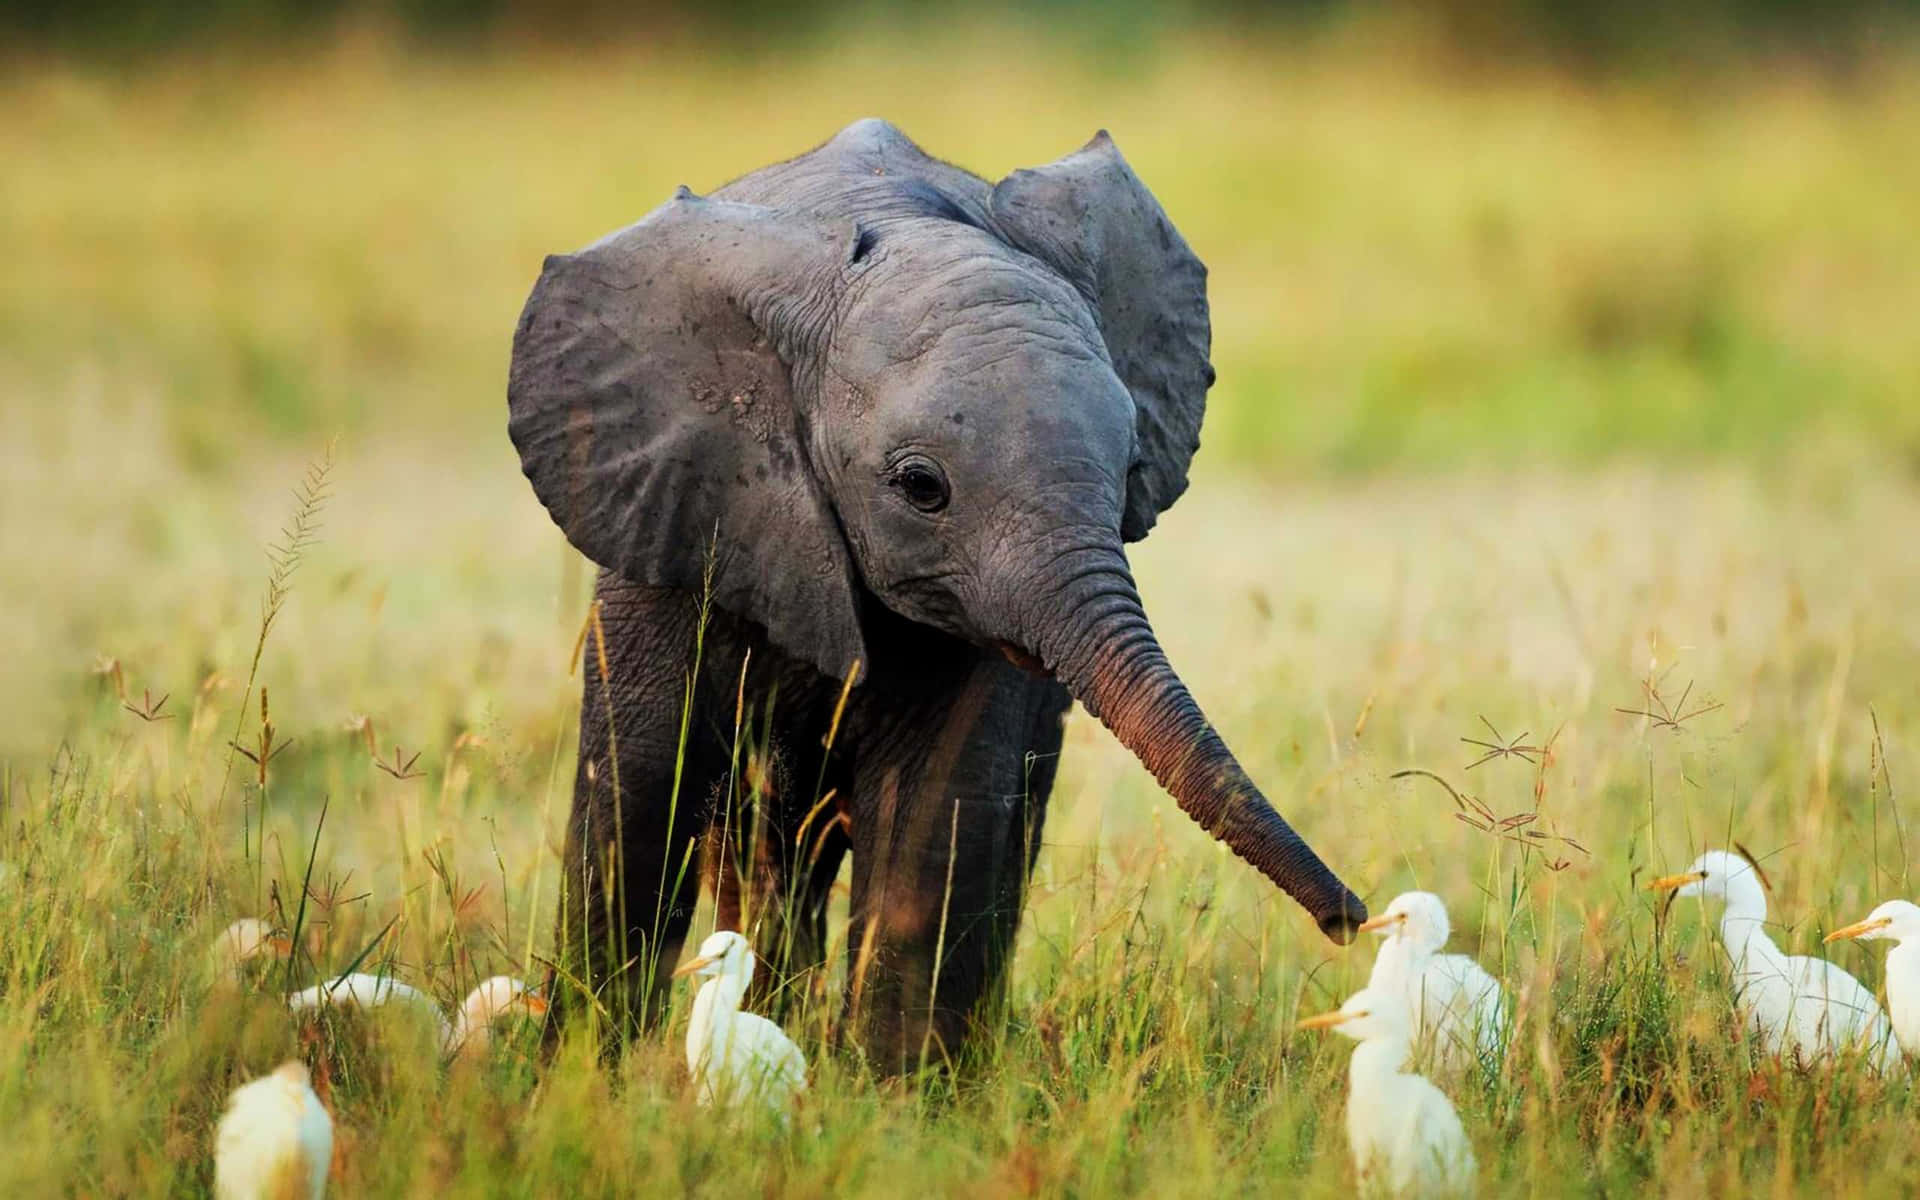 An Elephant Is Standing In The Grass With Ducks